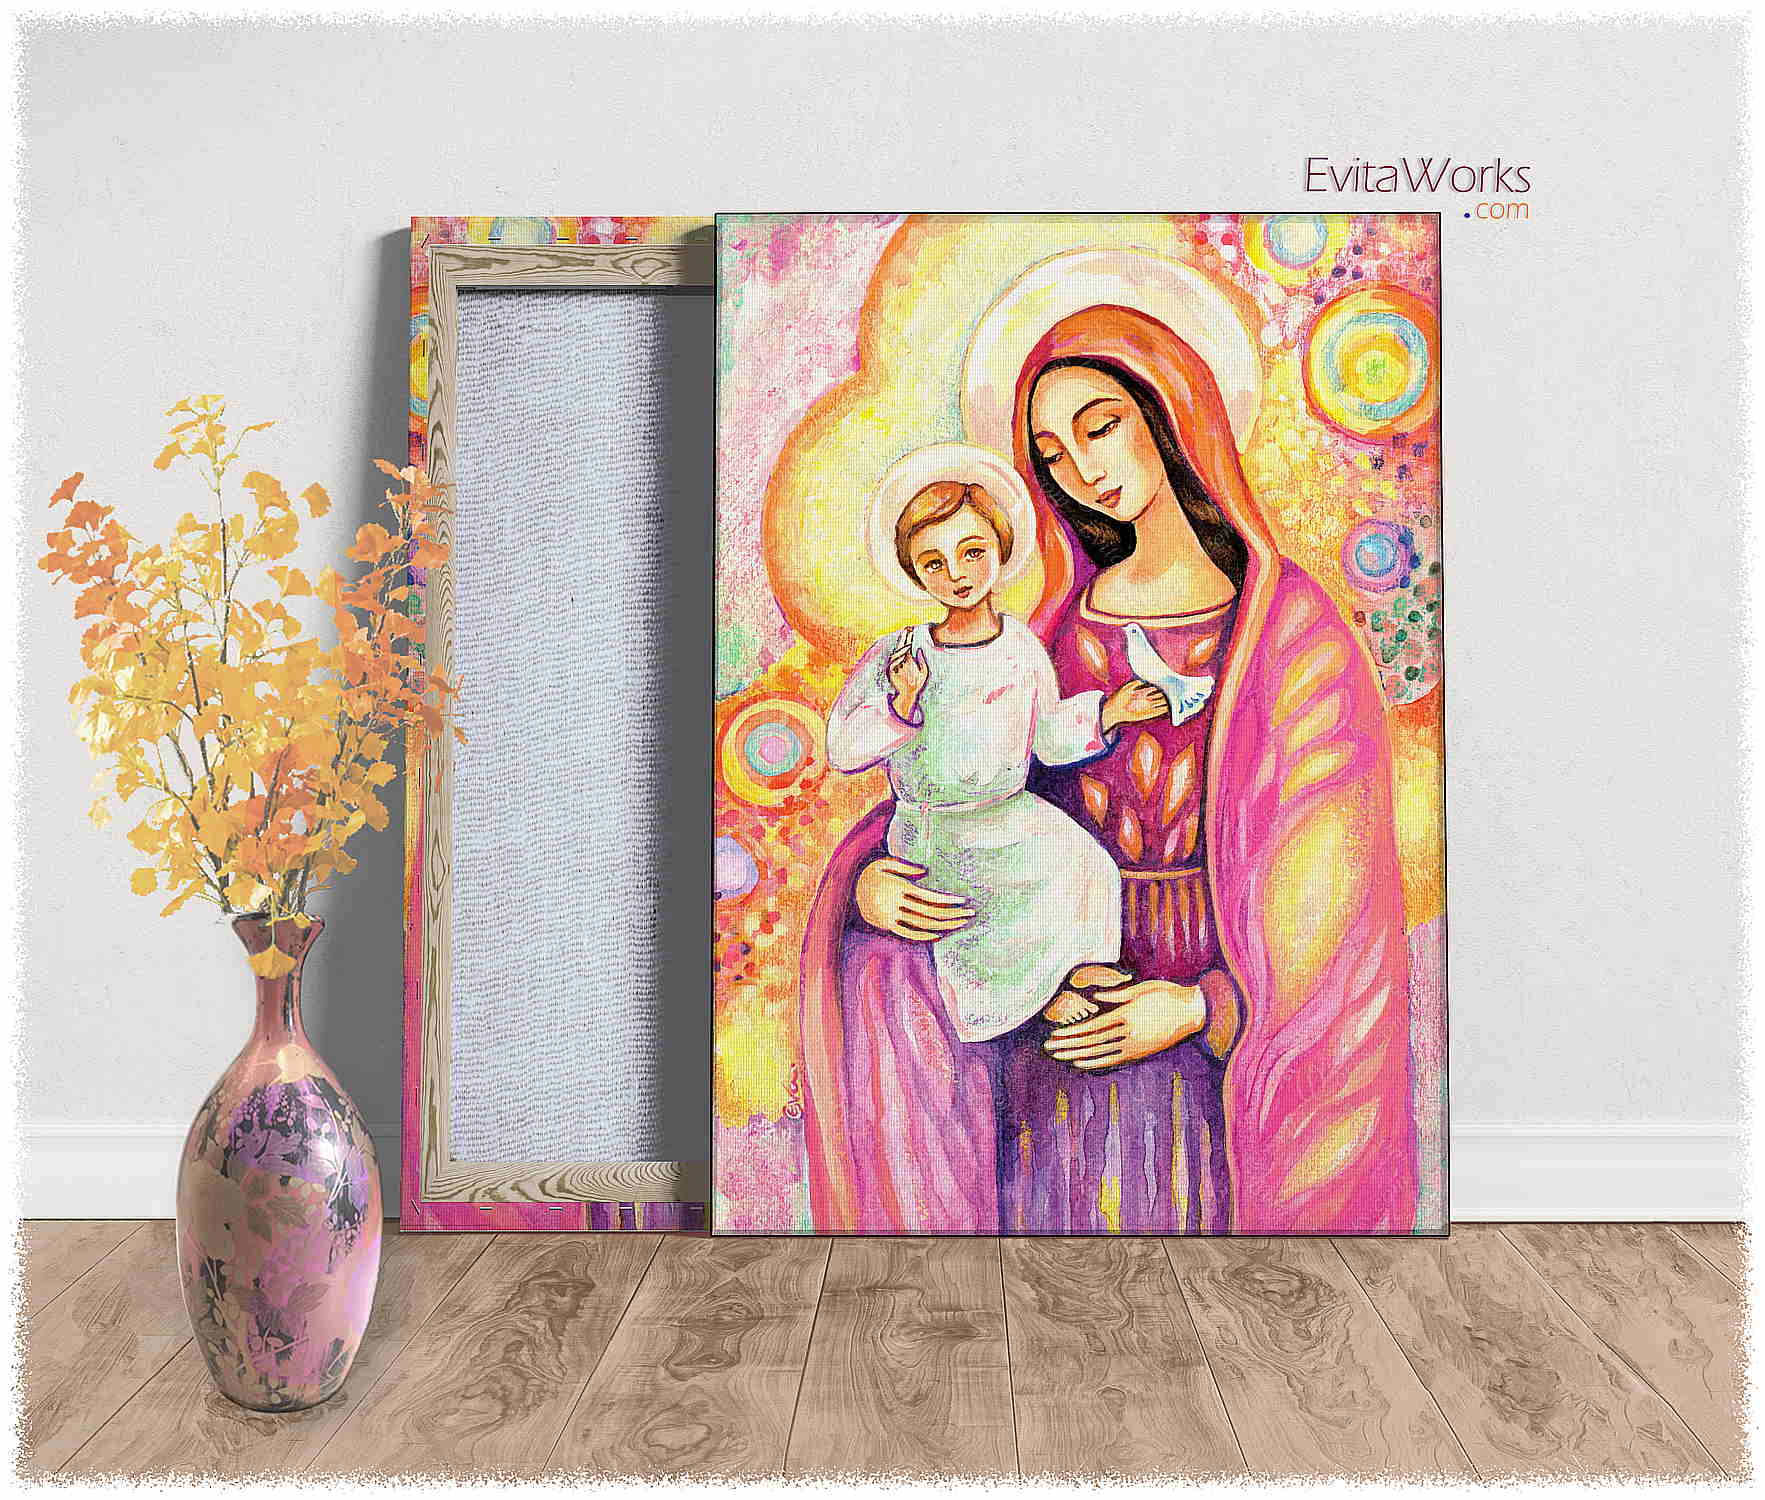 Hit to learn about "Blessing from Light, Madonna and Child" on canvases